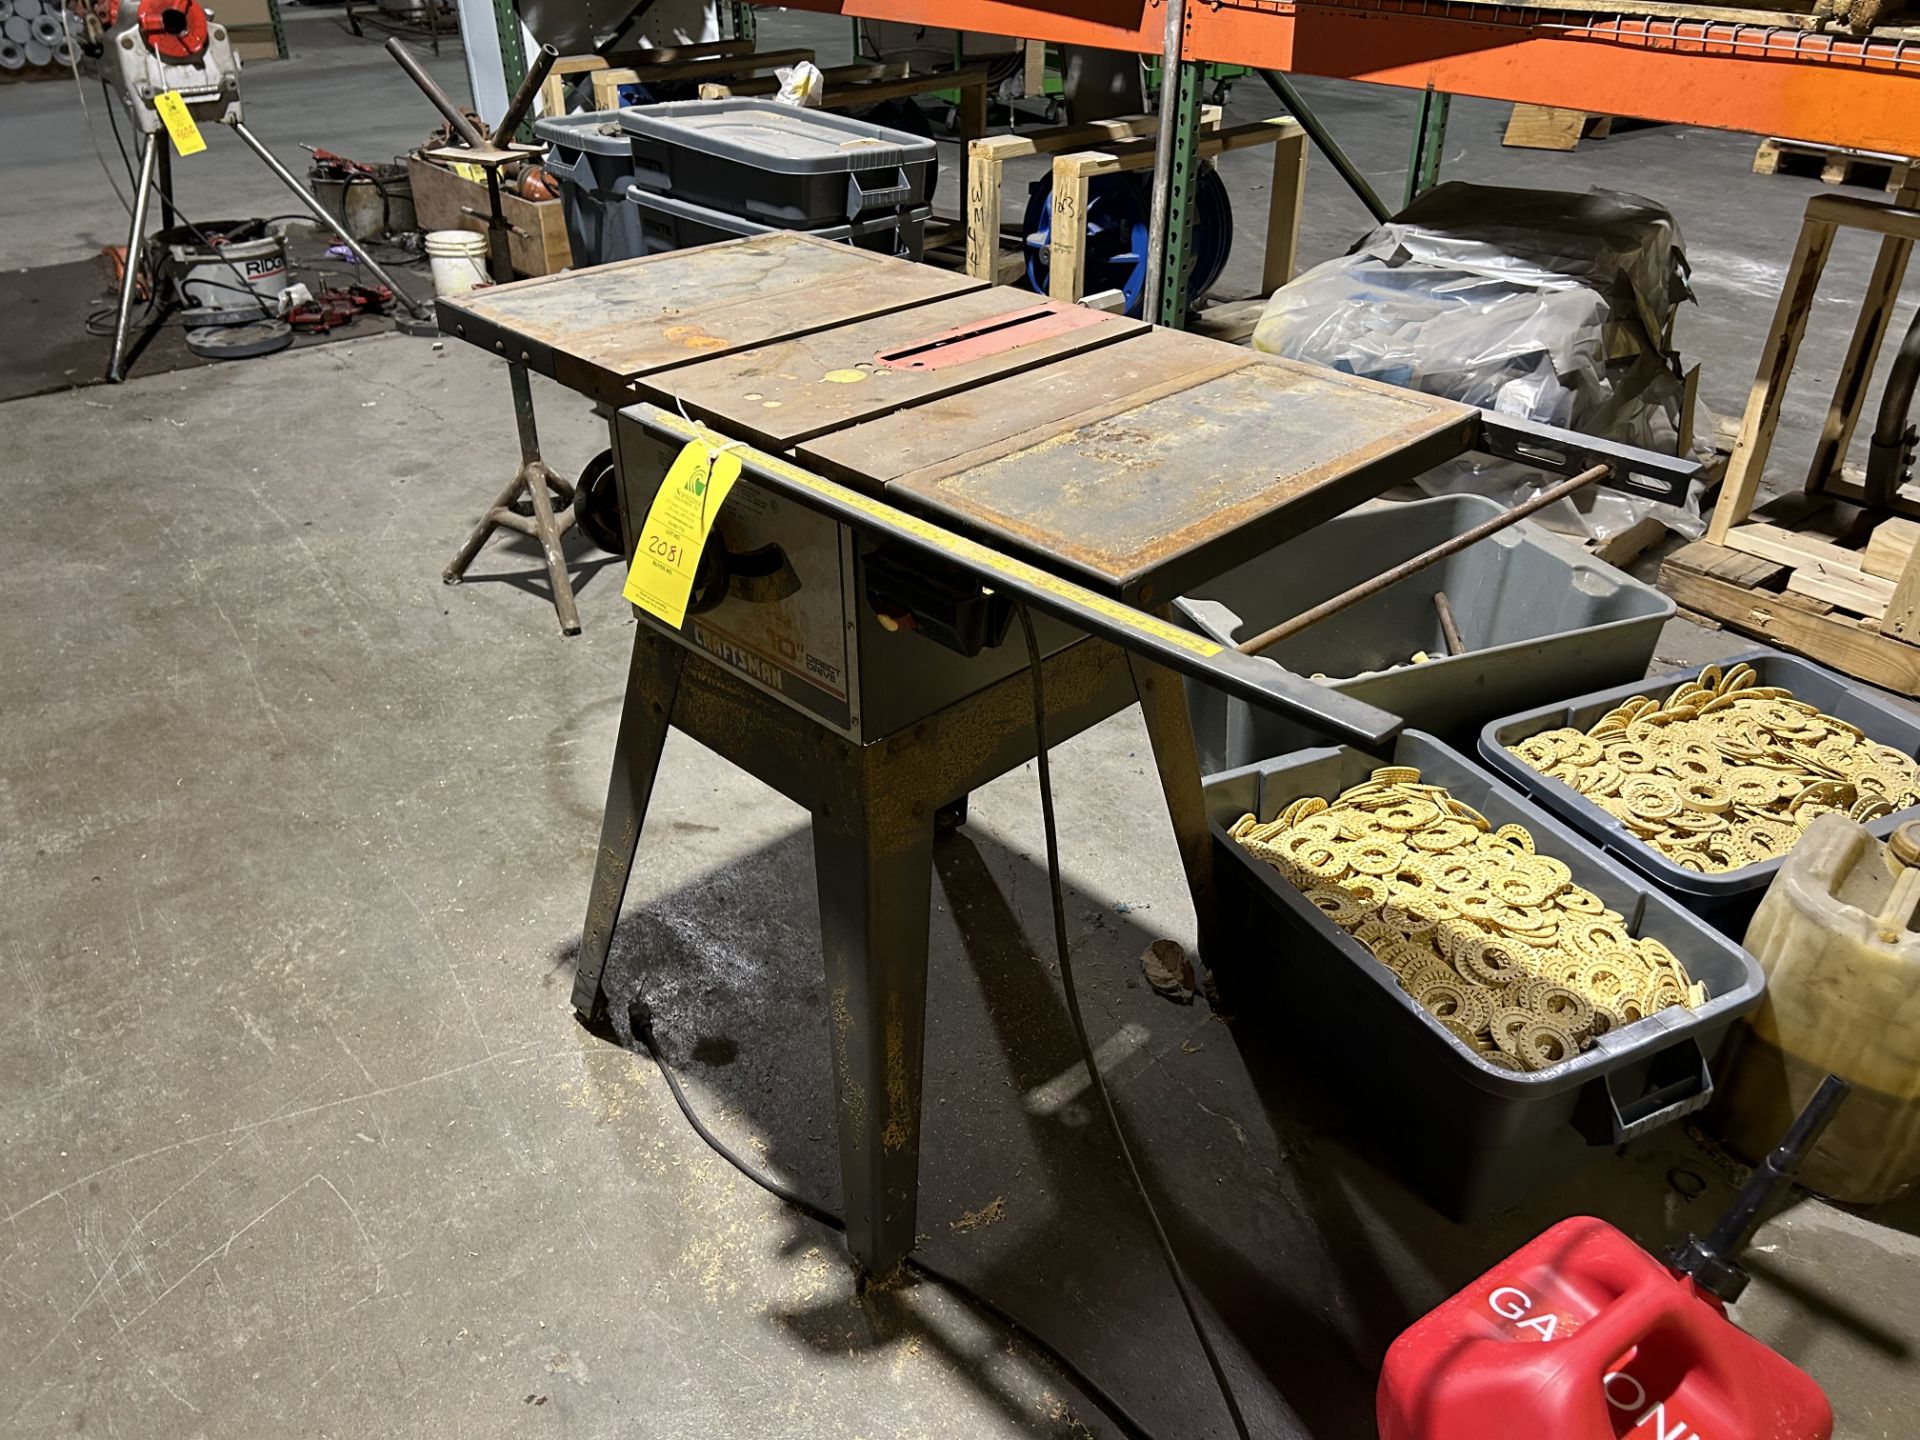 Craftsman Table Saw, Rigging & Loading Fee: $125 - Image 2 of 3